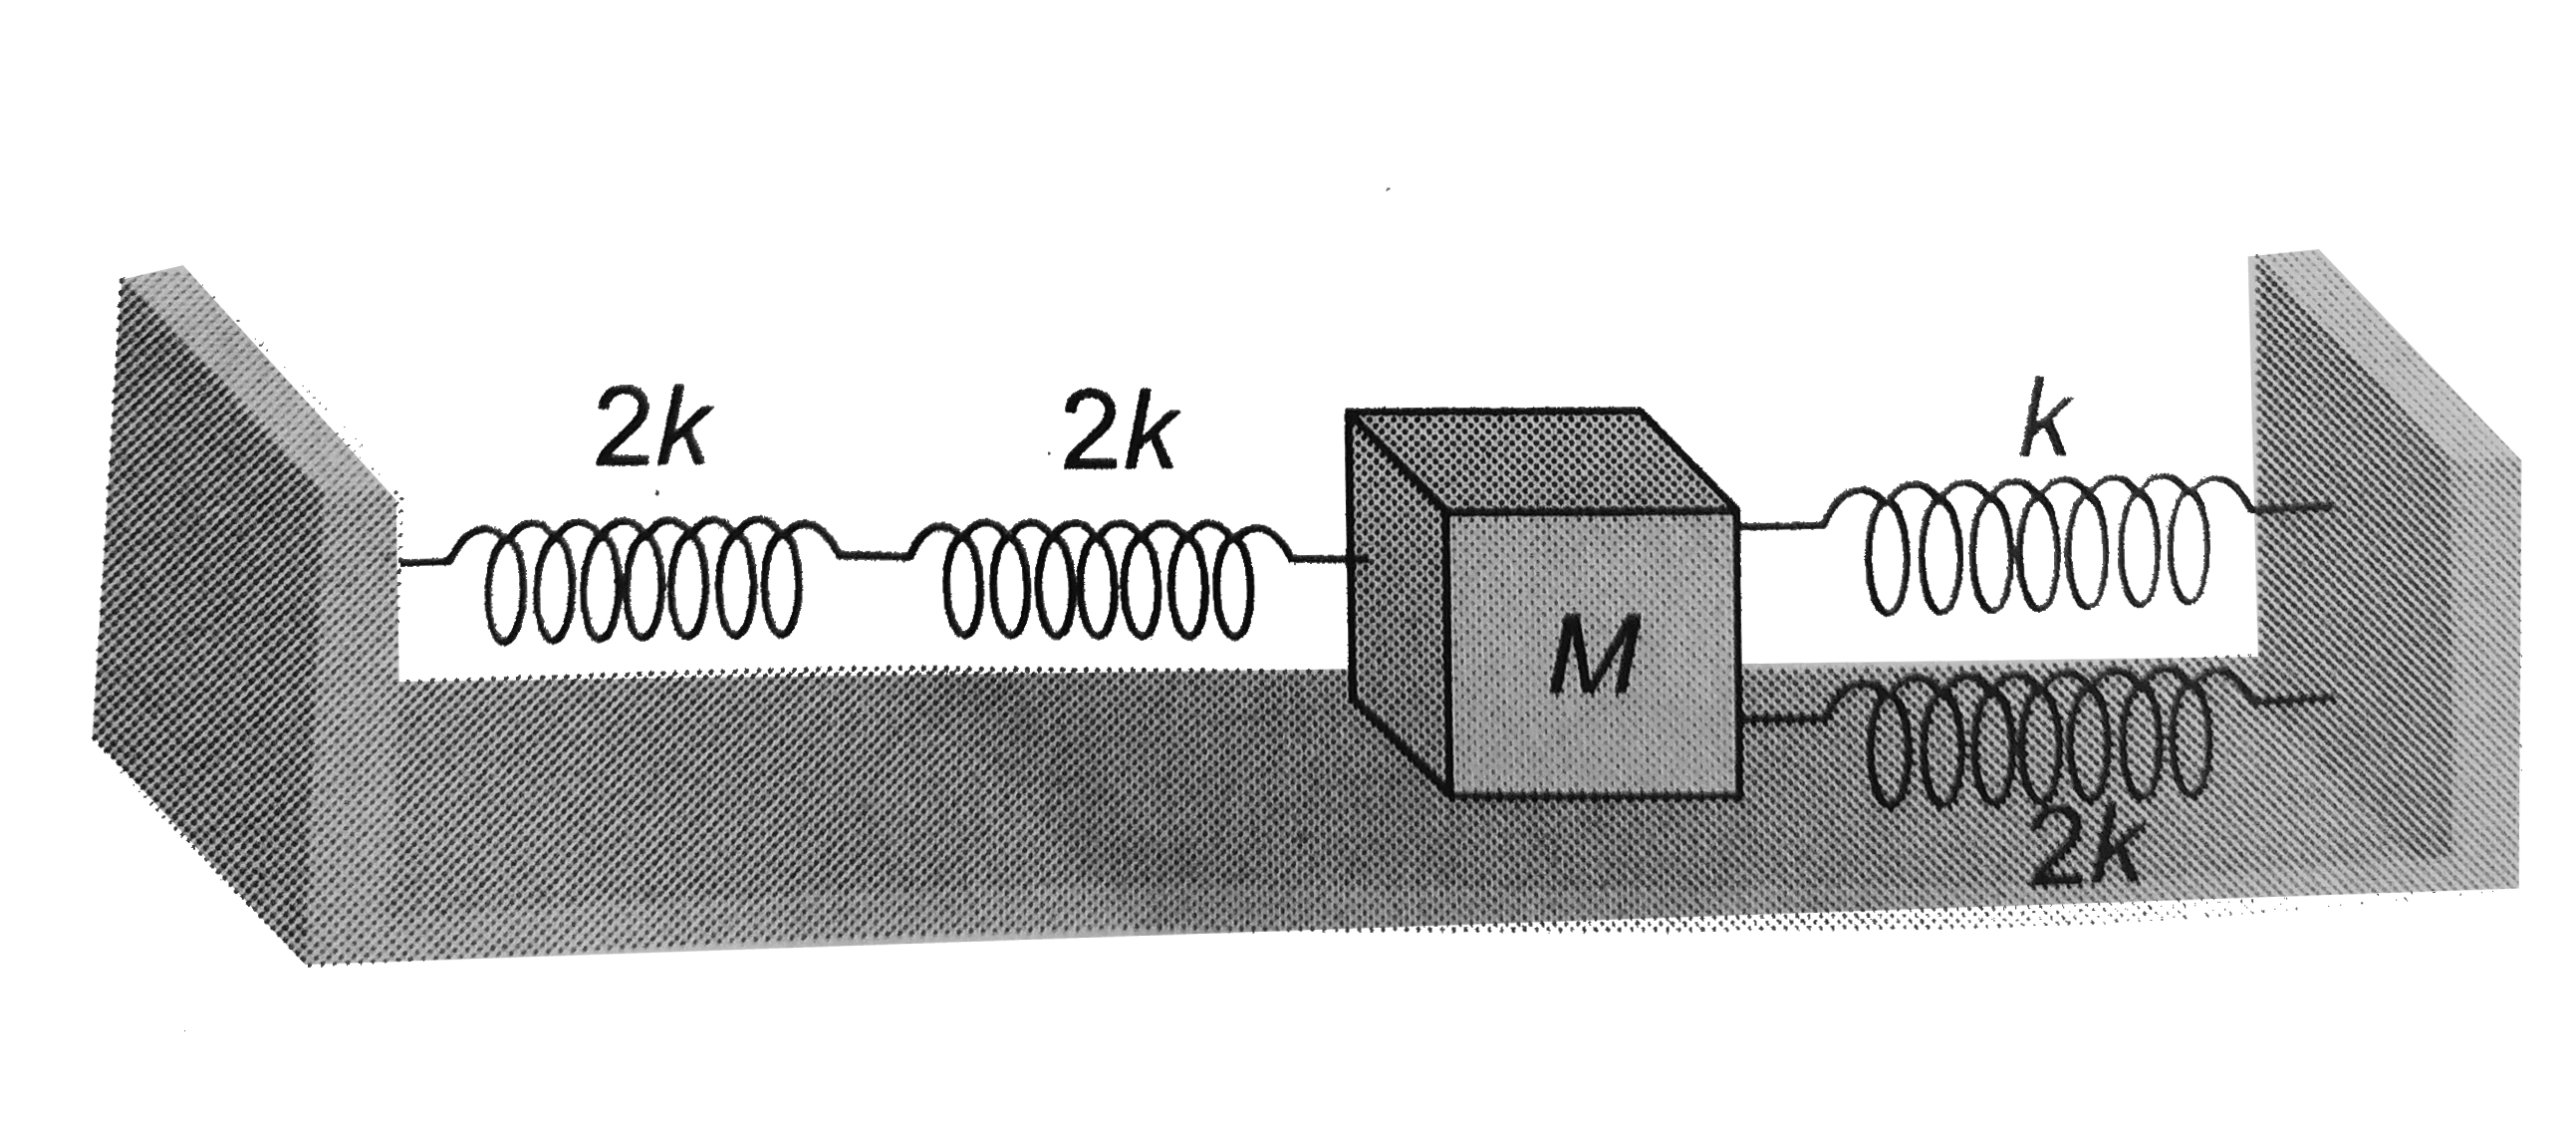 Four massless spring whose force constant are 2k , 2k, k and 2k respectively are attached to a mass M kept on a frictions plate (as shown in figure) if the mass M is displaced in the horizontal direction then the frequency of oscillation of the system is